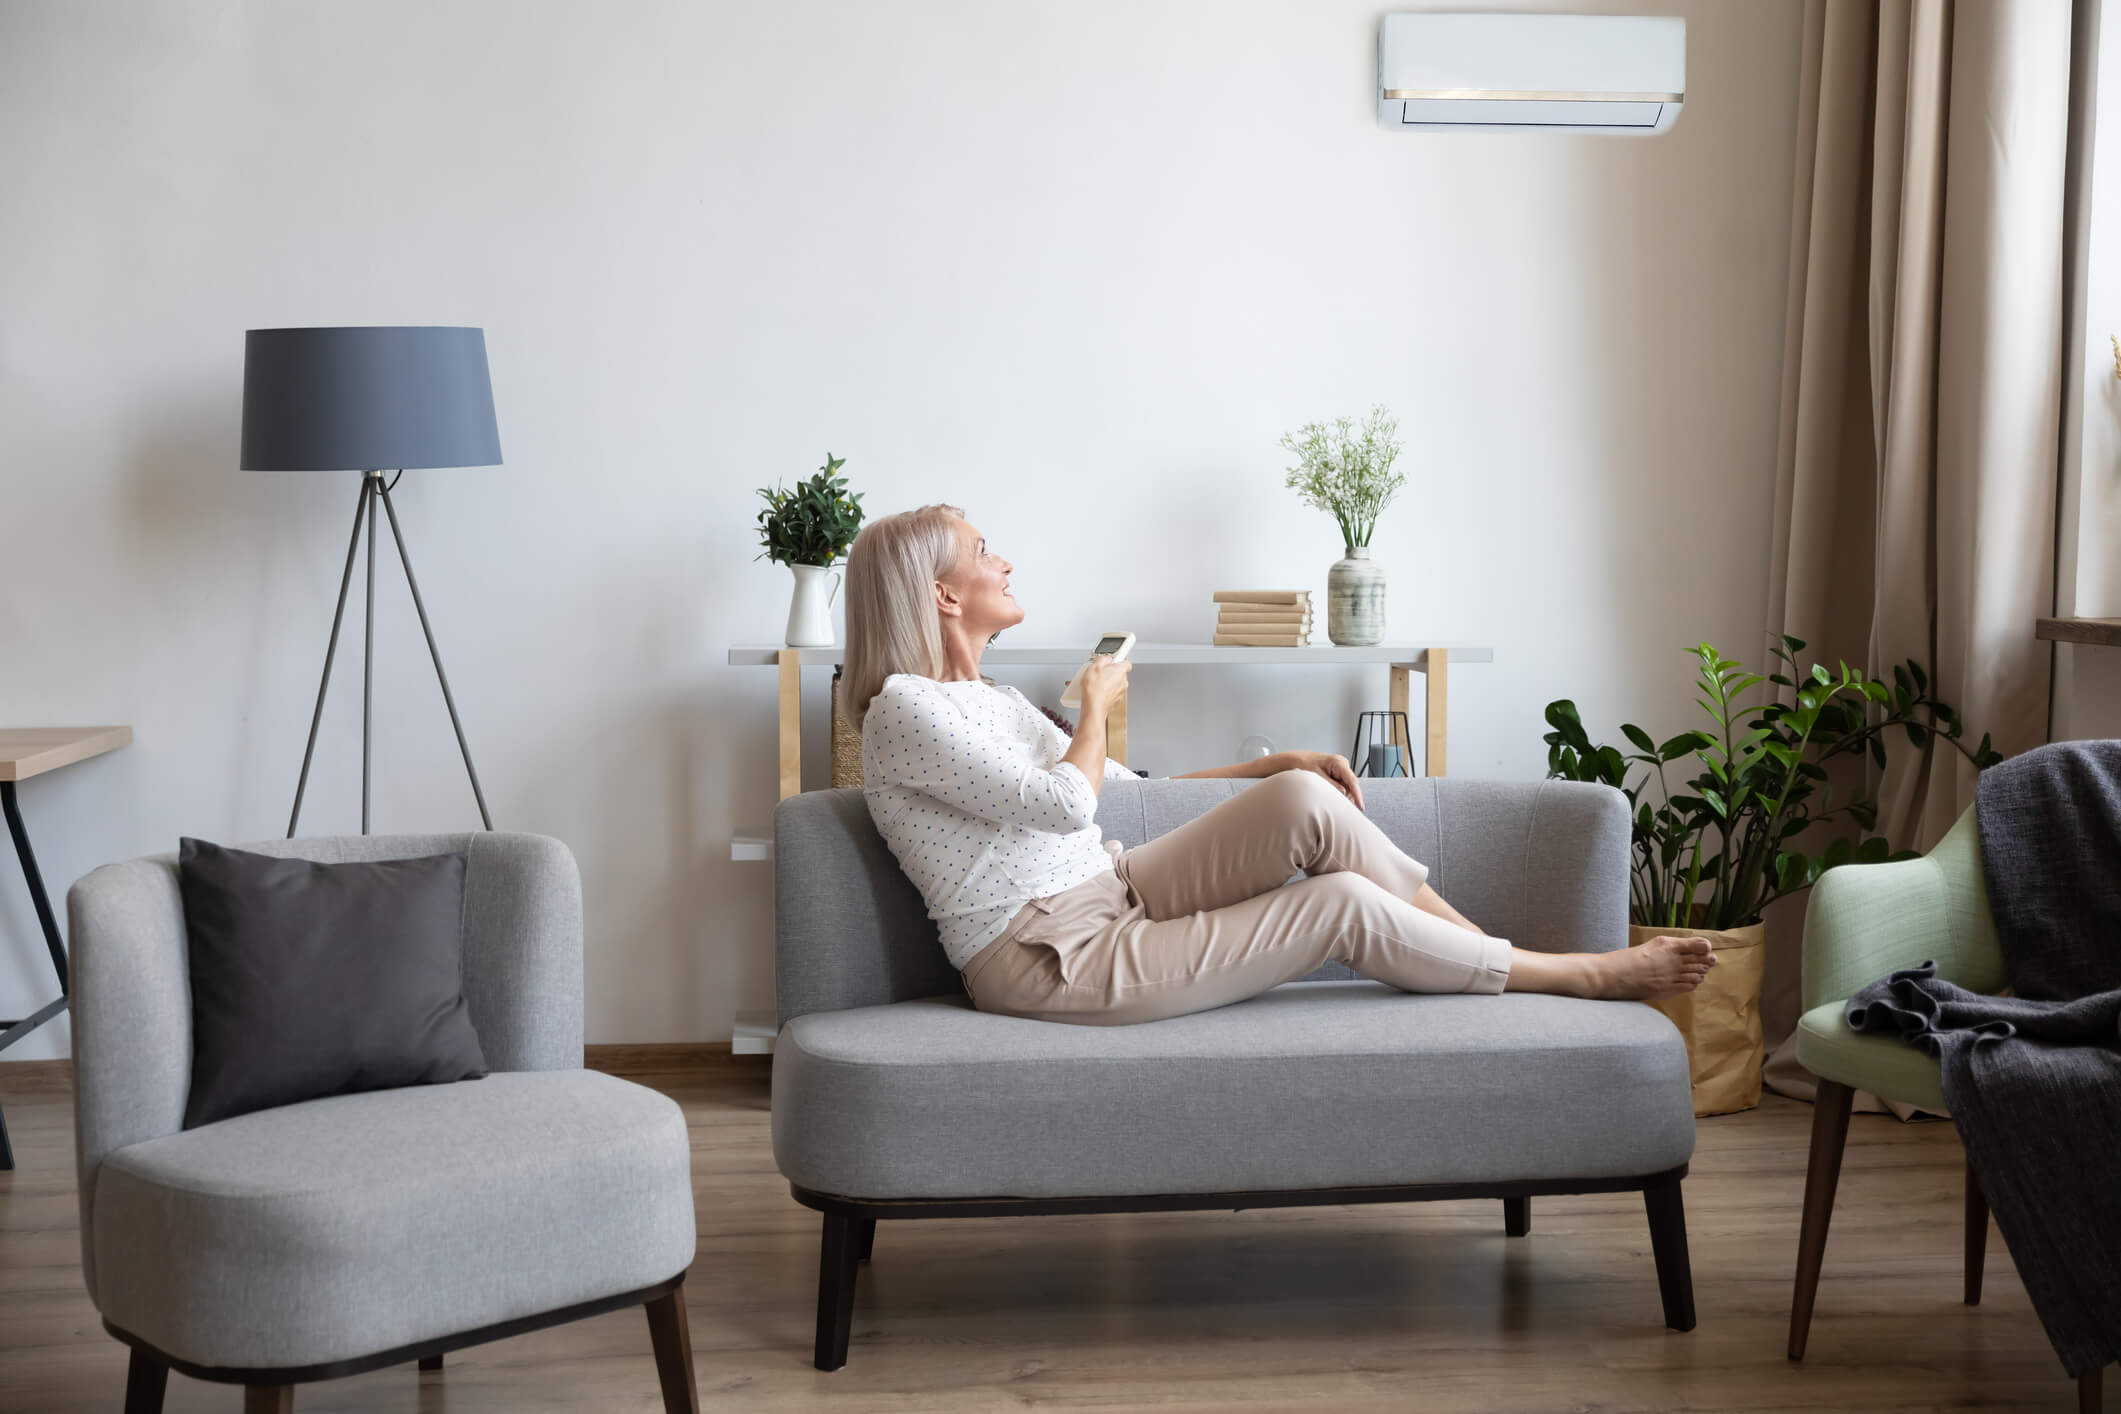 Ductless AC inside the home